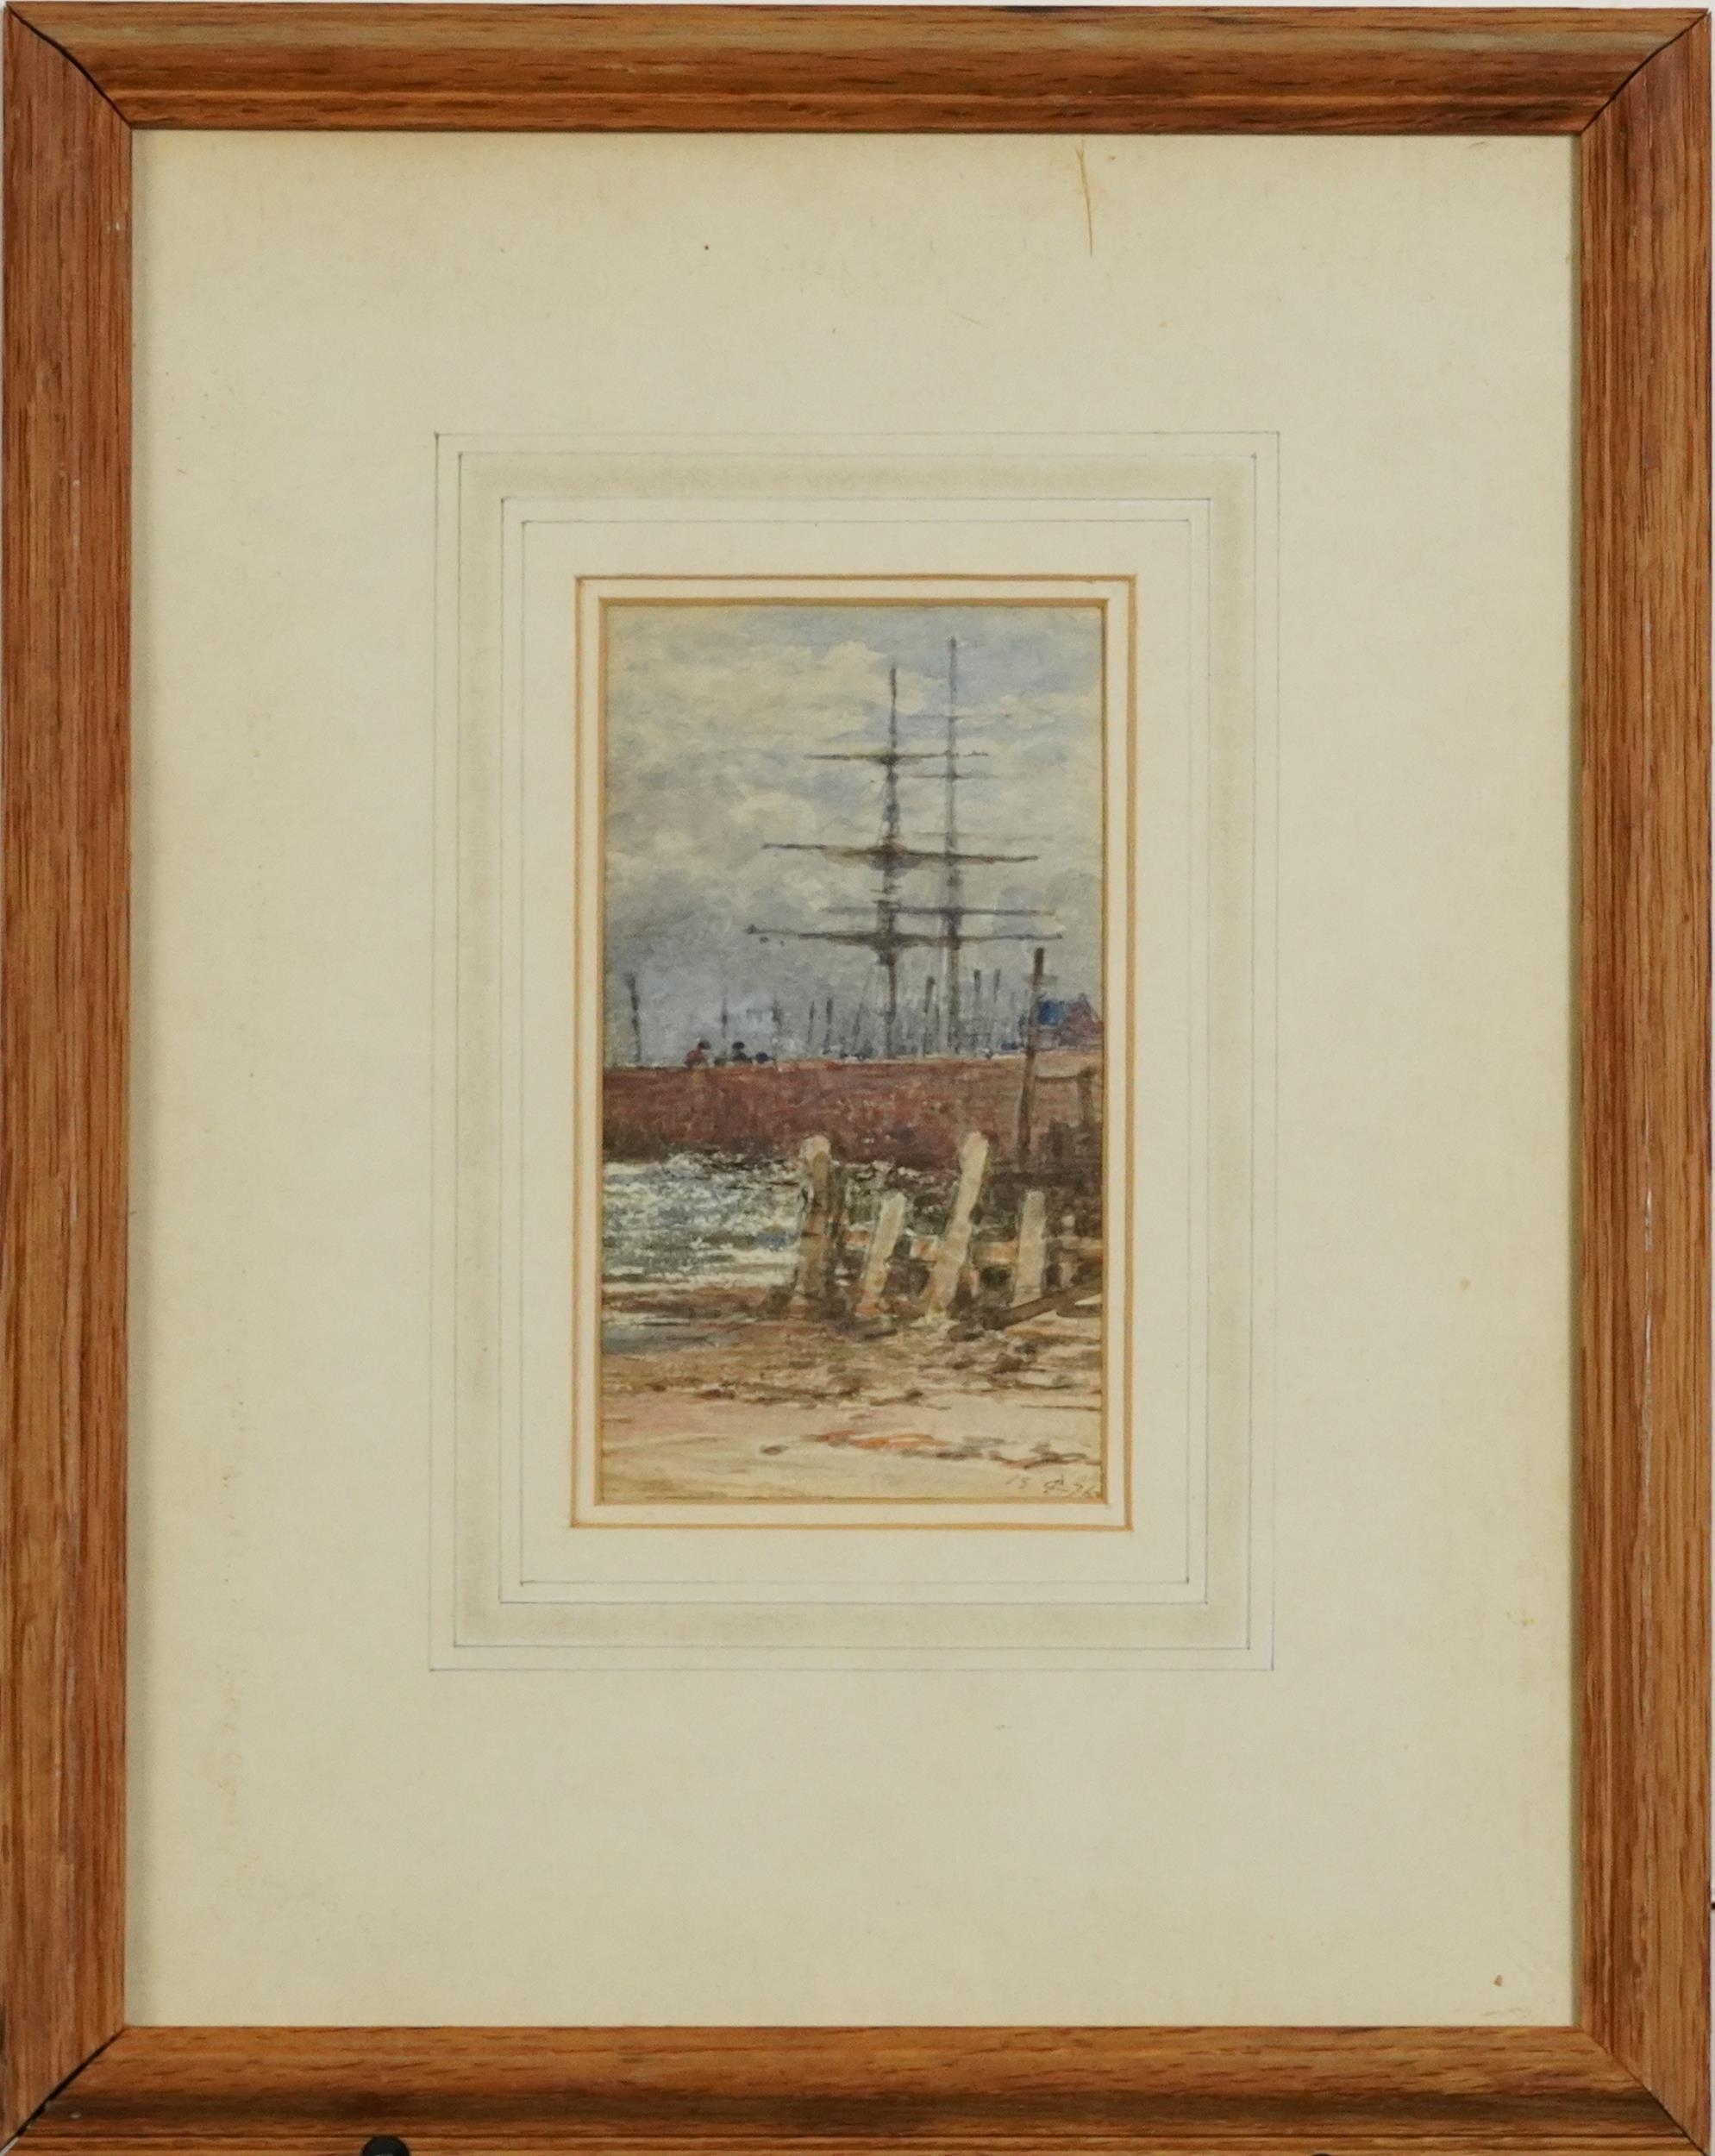 James Cassie 1876 - Shipping in Arbroath Harbour, 19th century Scottish watercolour, signed with - Image 2 of 4